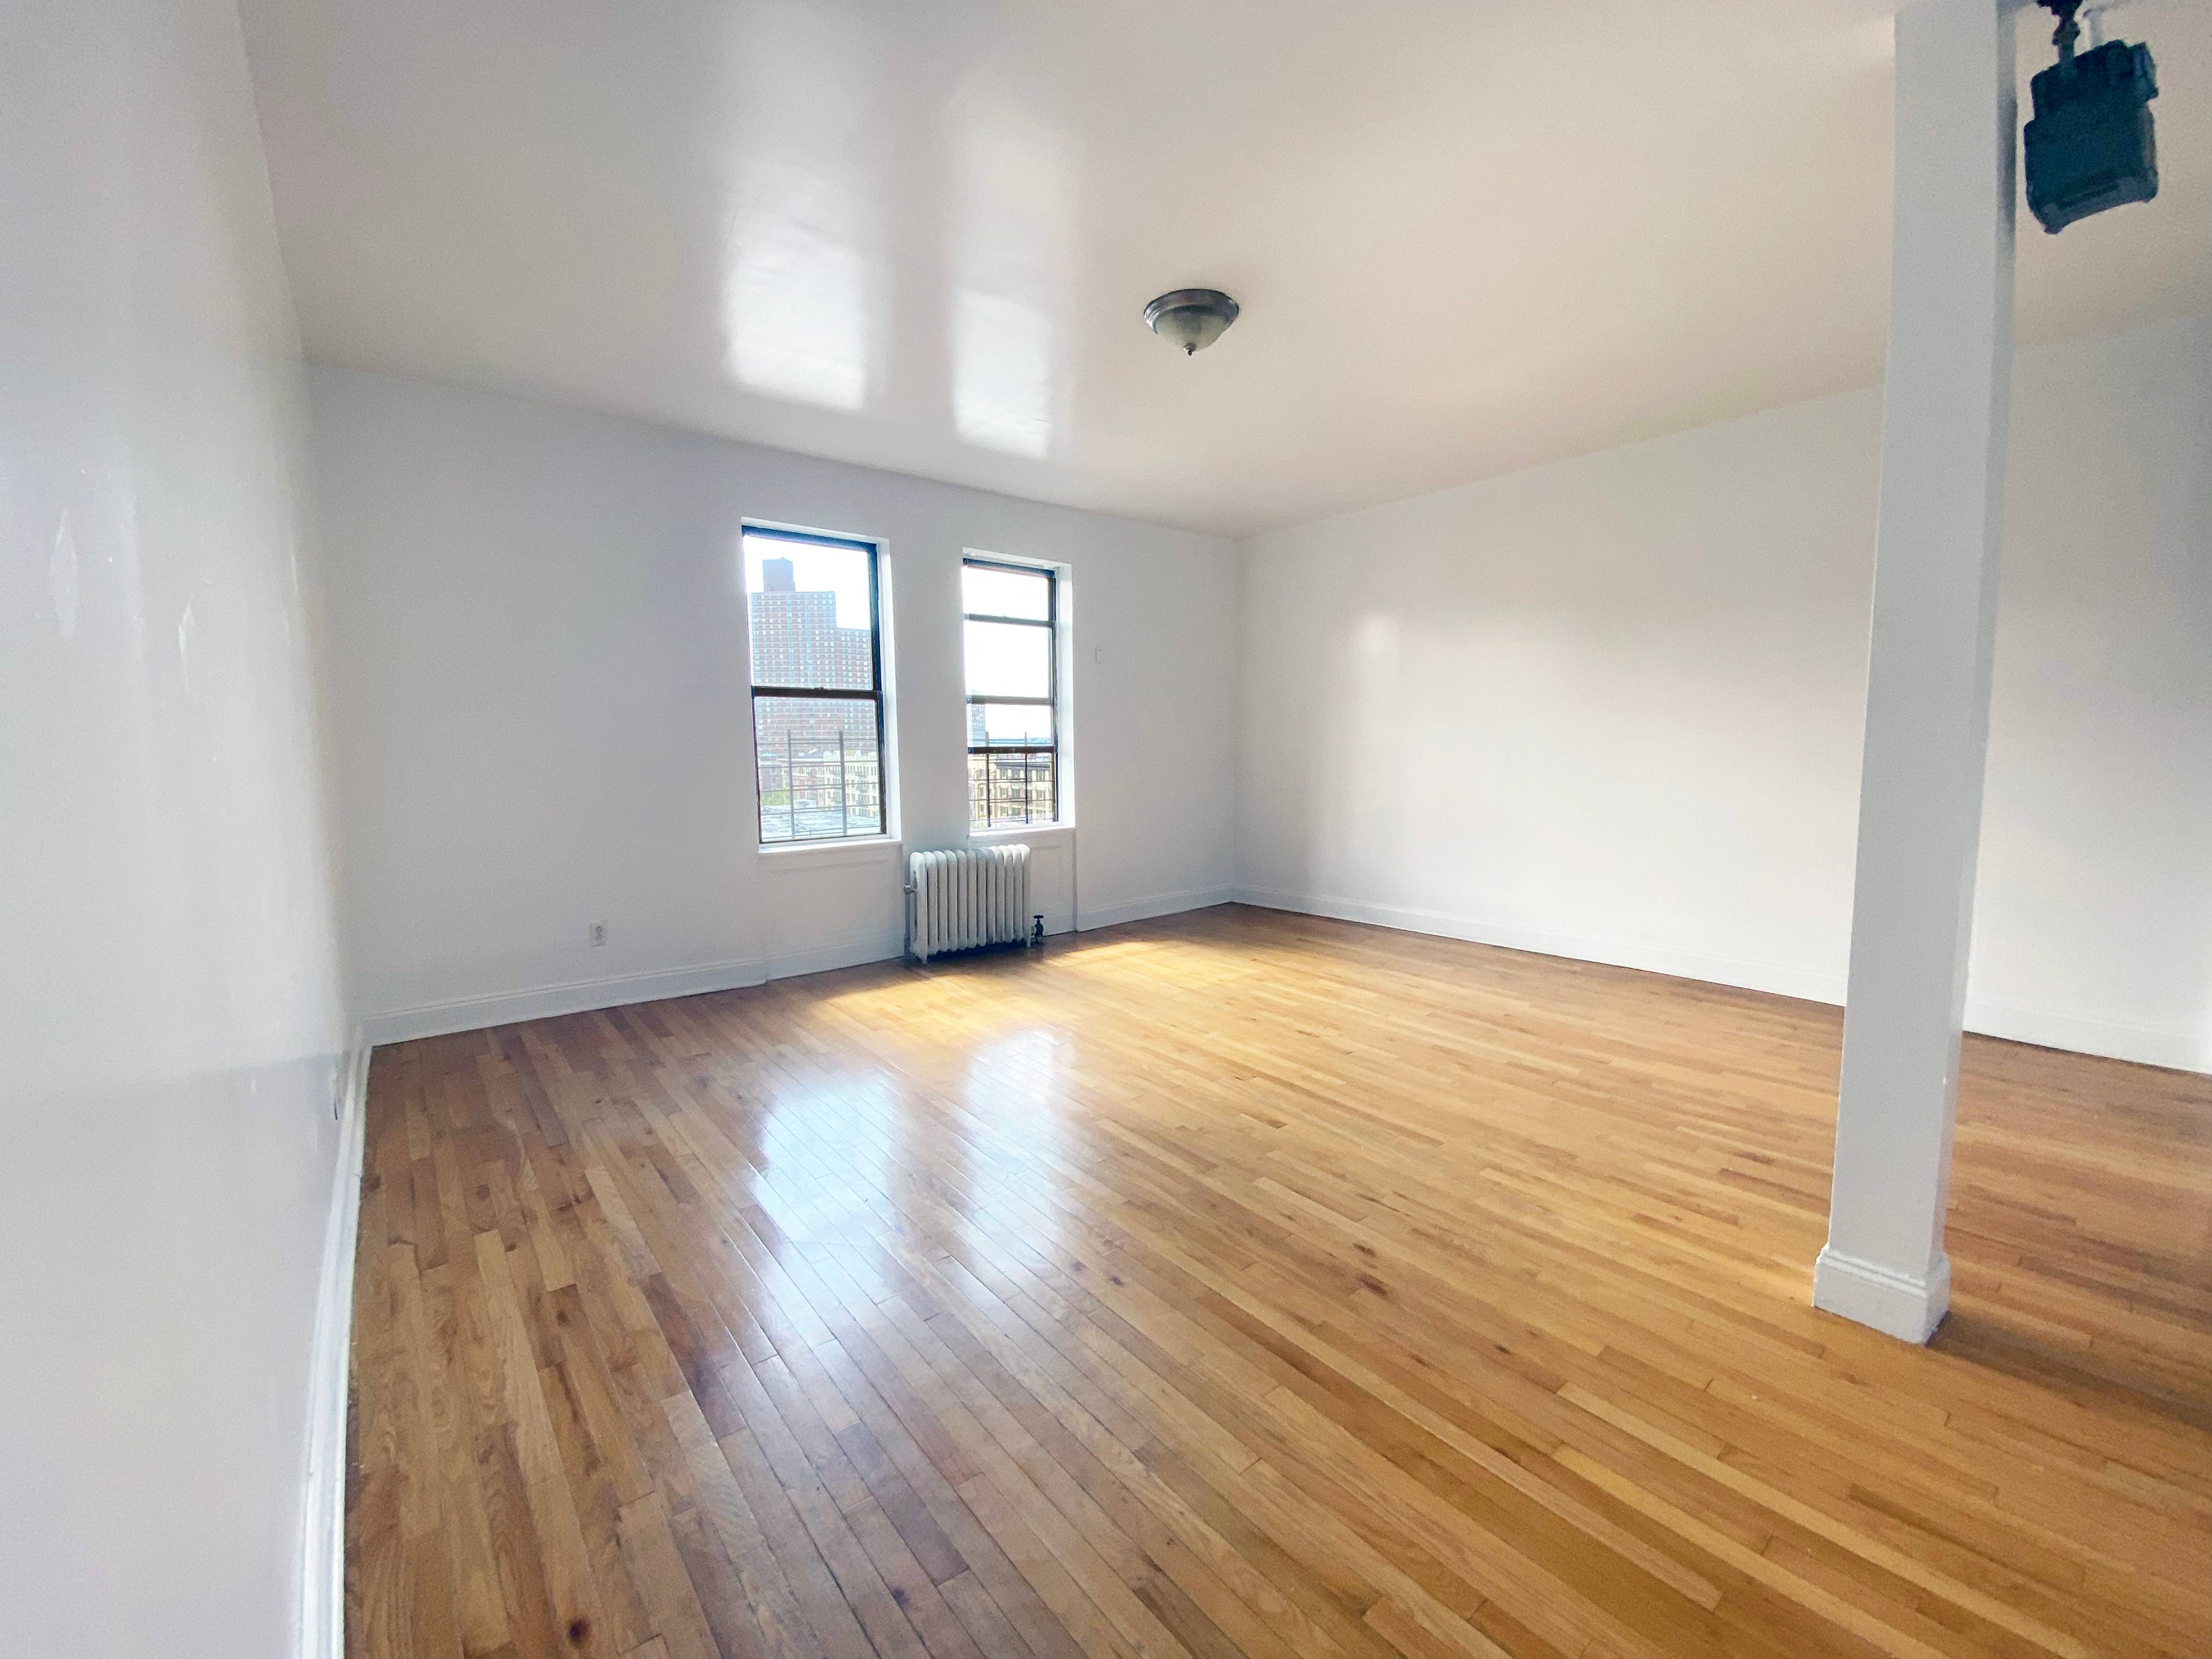 SPACIOUS Hamilton Heights 2BR Featuring Hardwood Floors and Dishwasher.